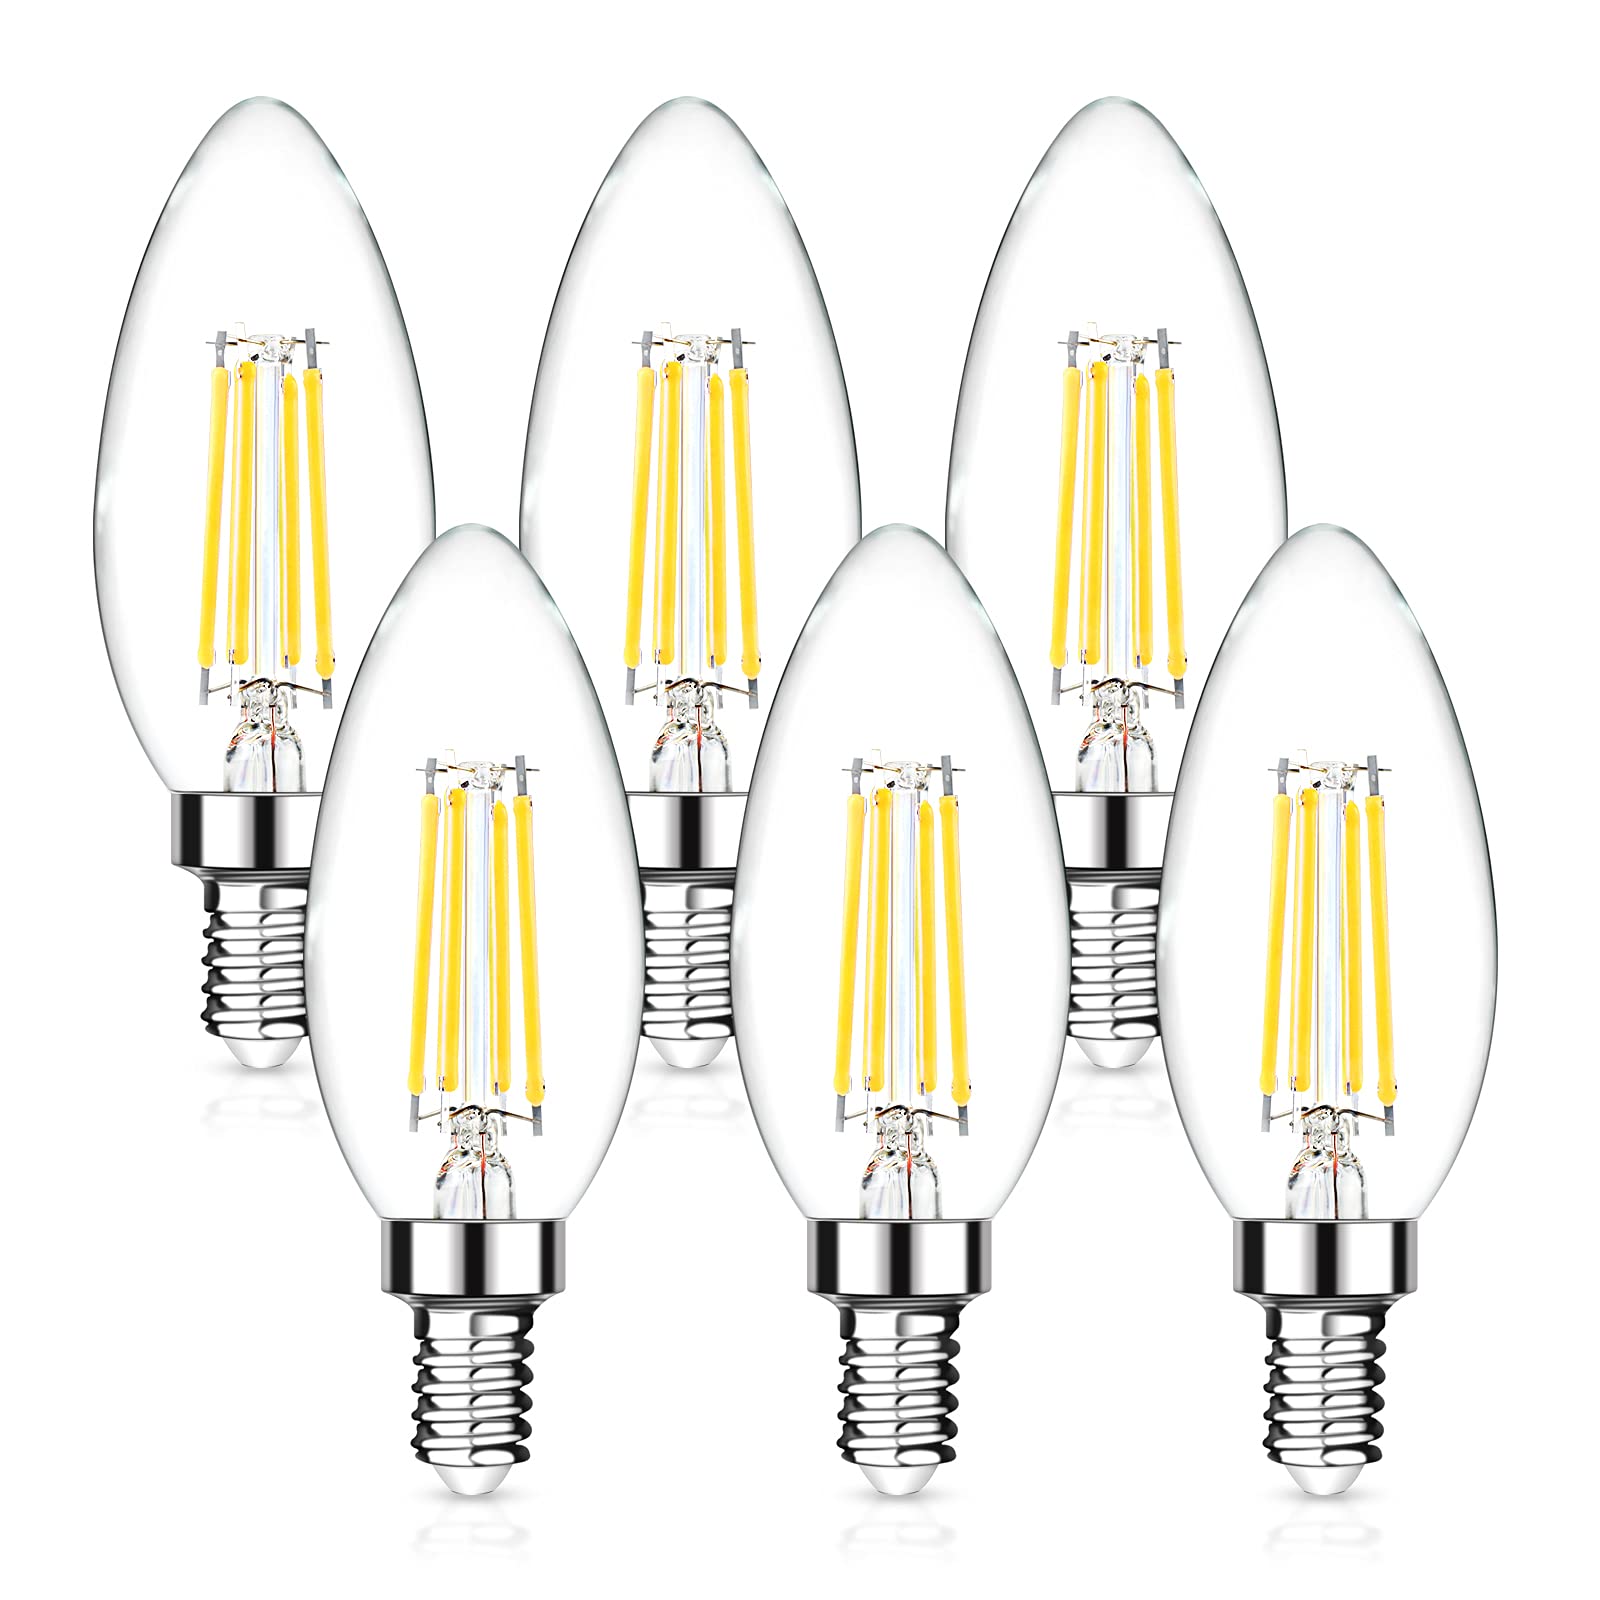 Defurhome E14 LED Filament Bulbs,4W,50W Equivalent,550LM,Cool White 6000K,C35 Small Edison Screw SES Candle Bulbs, Vintage Energy Saving Candelabra Bulb, Non-Dimmable(6 Pack)